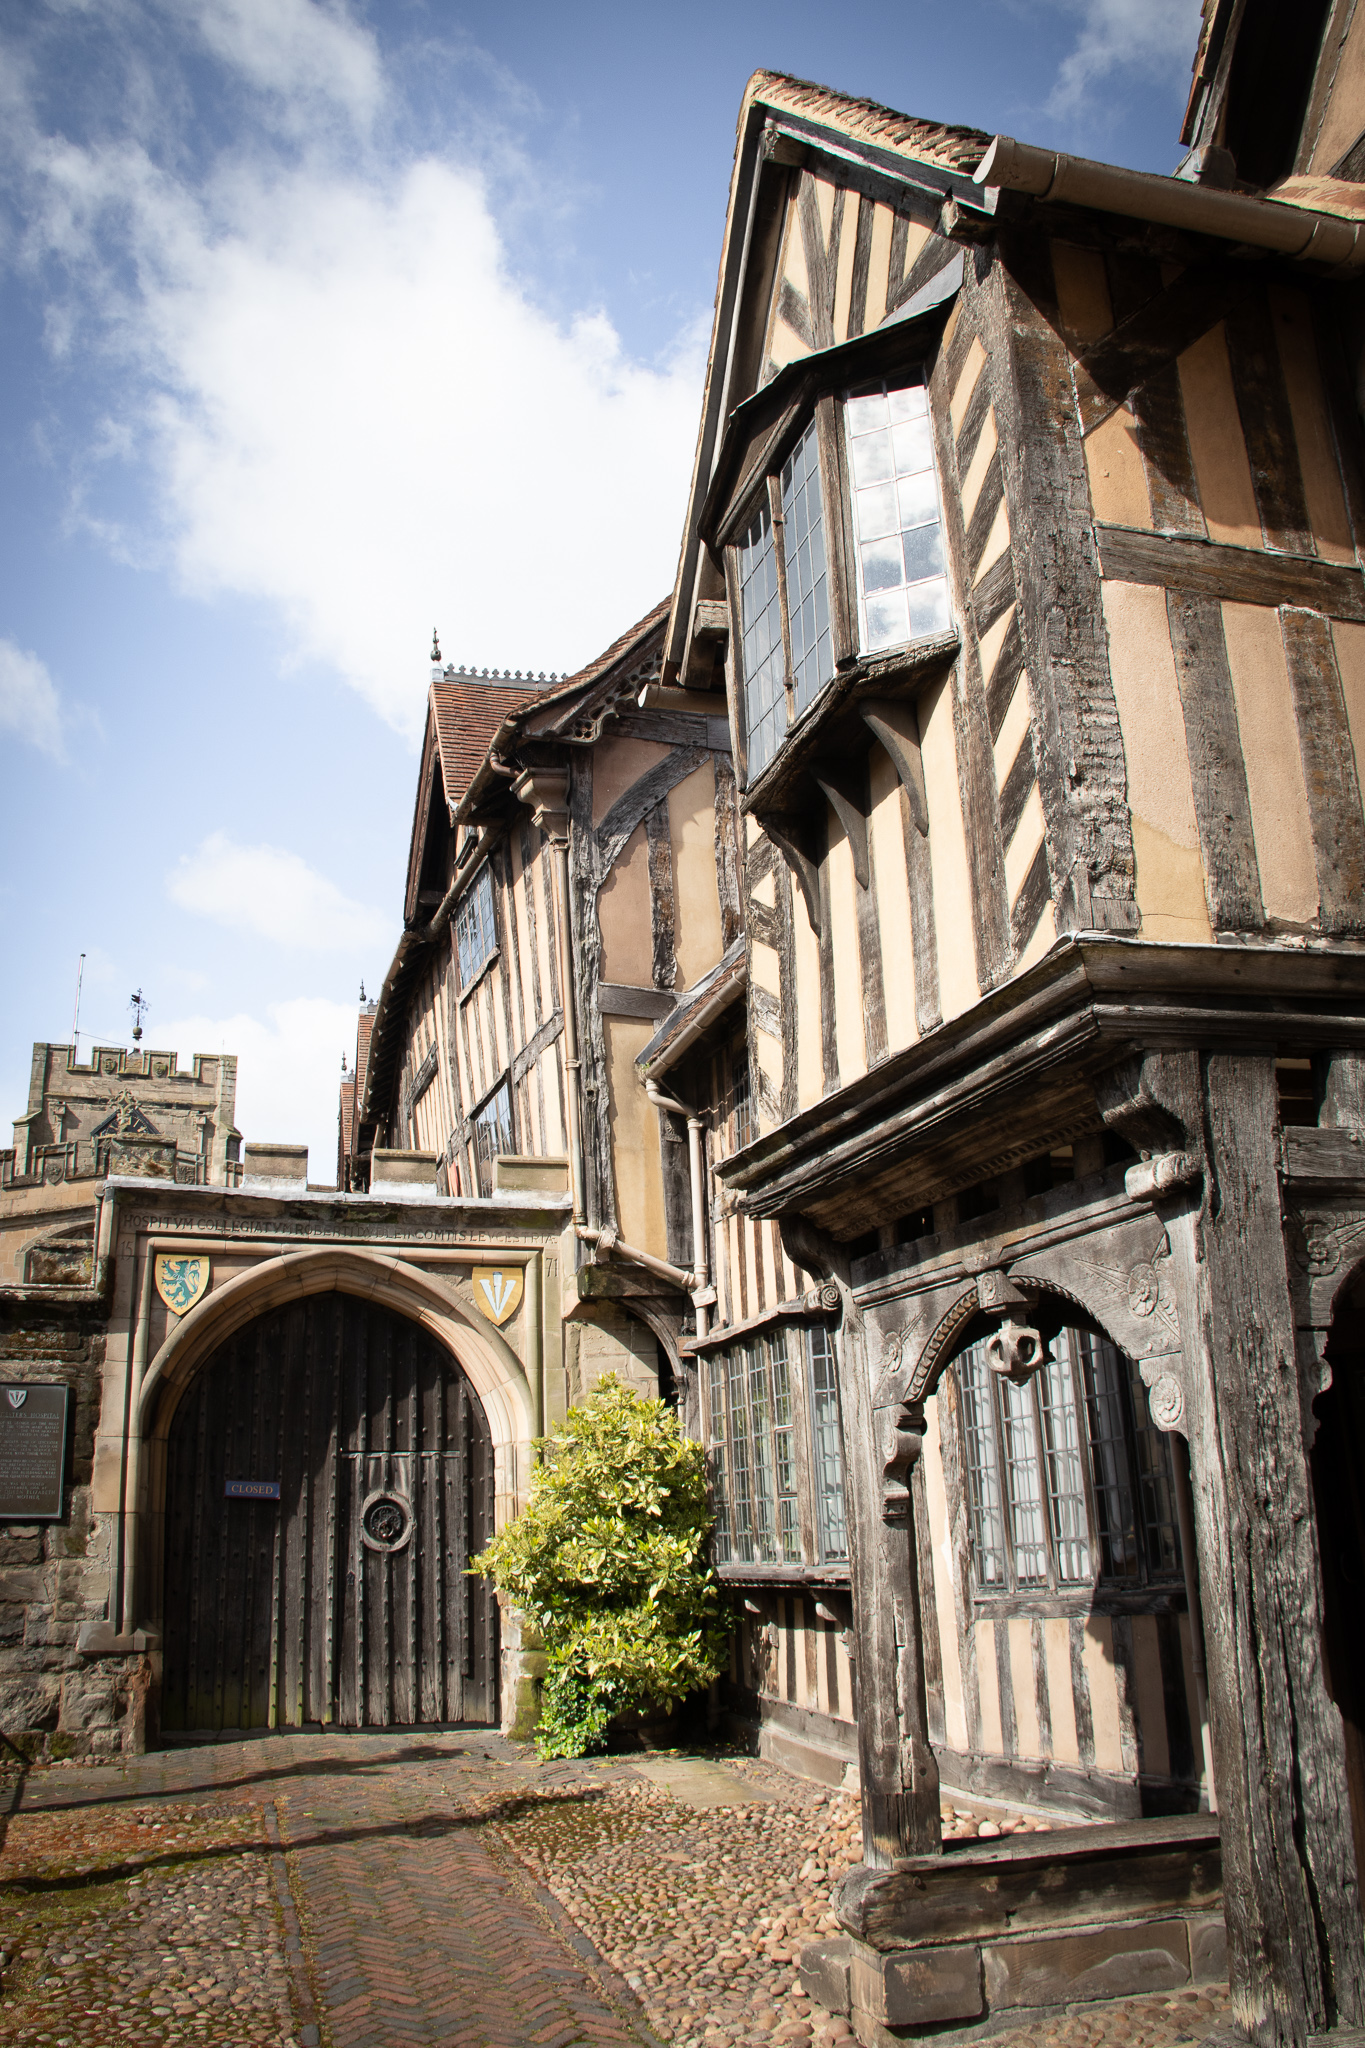 The Lord Leycester Hospital is one of the oldest buildings in Warwick. It's know as being one of the best examples of medieval courtyard architecture. 